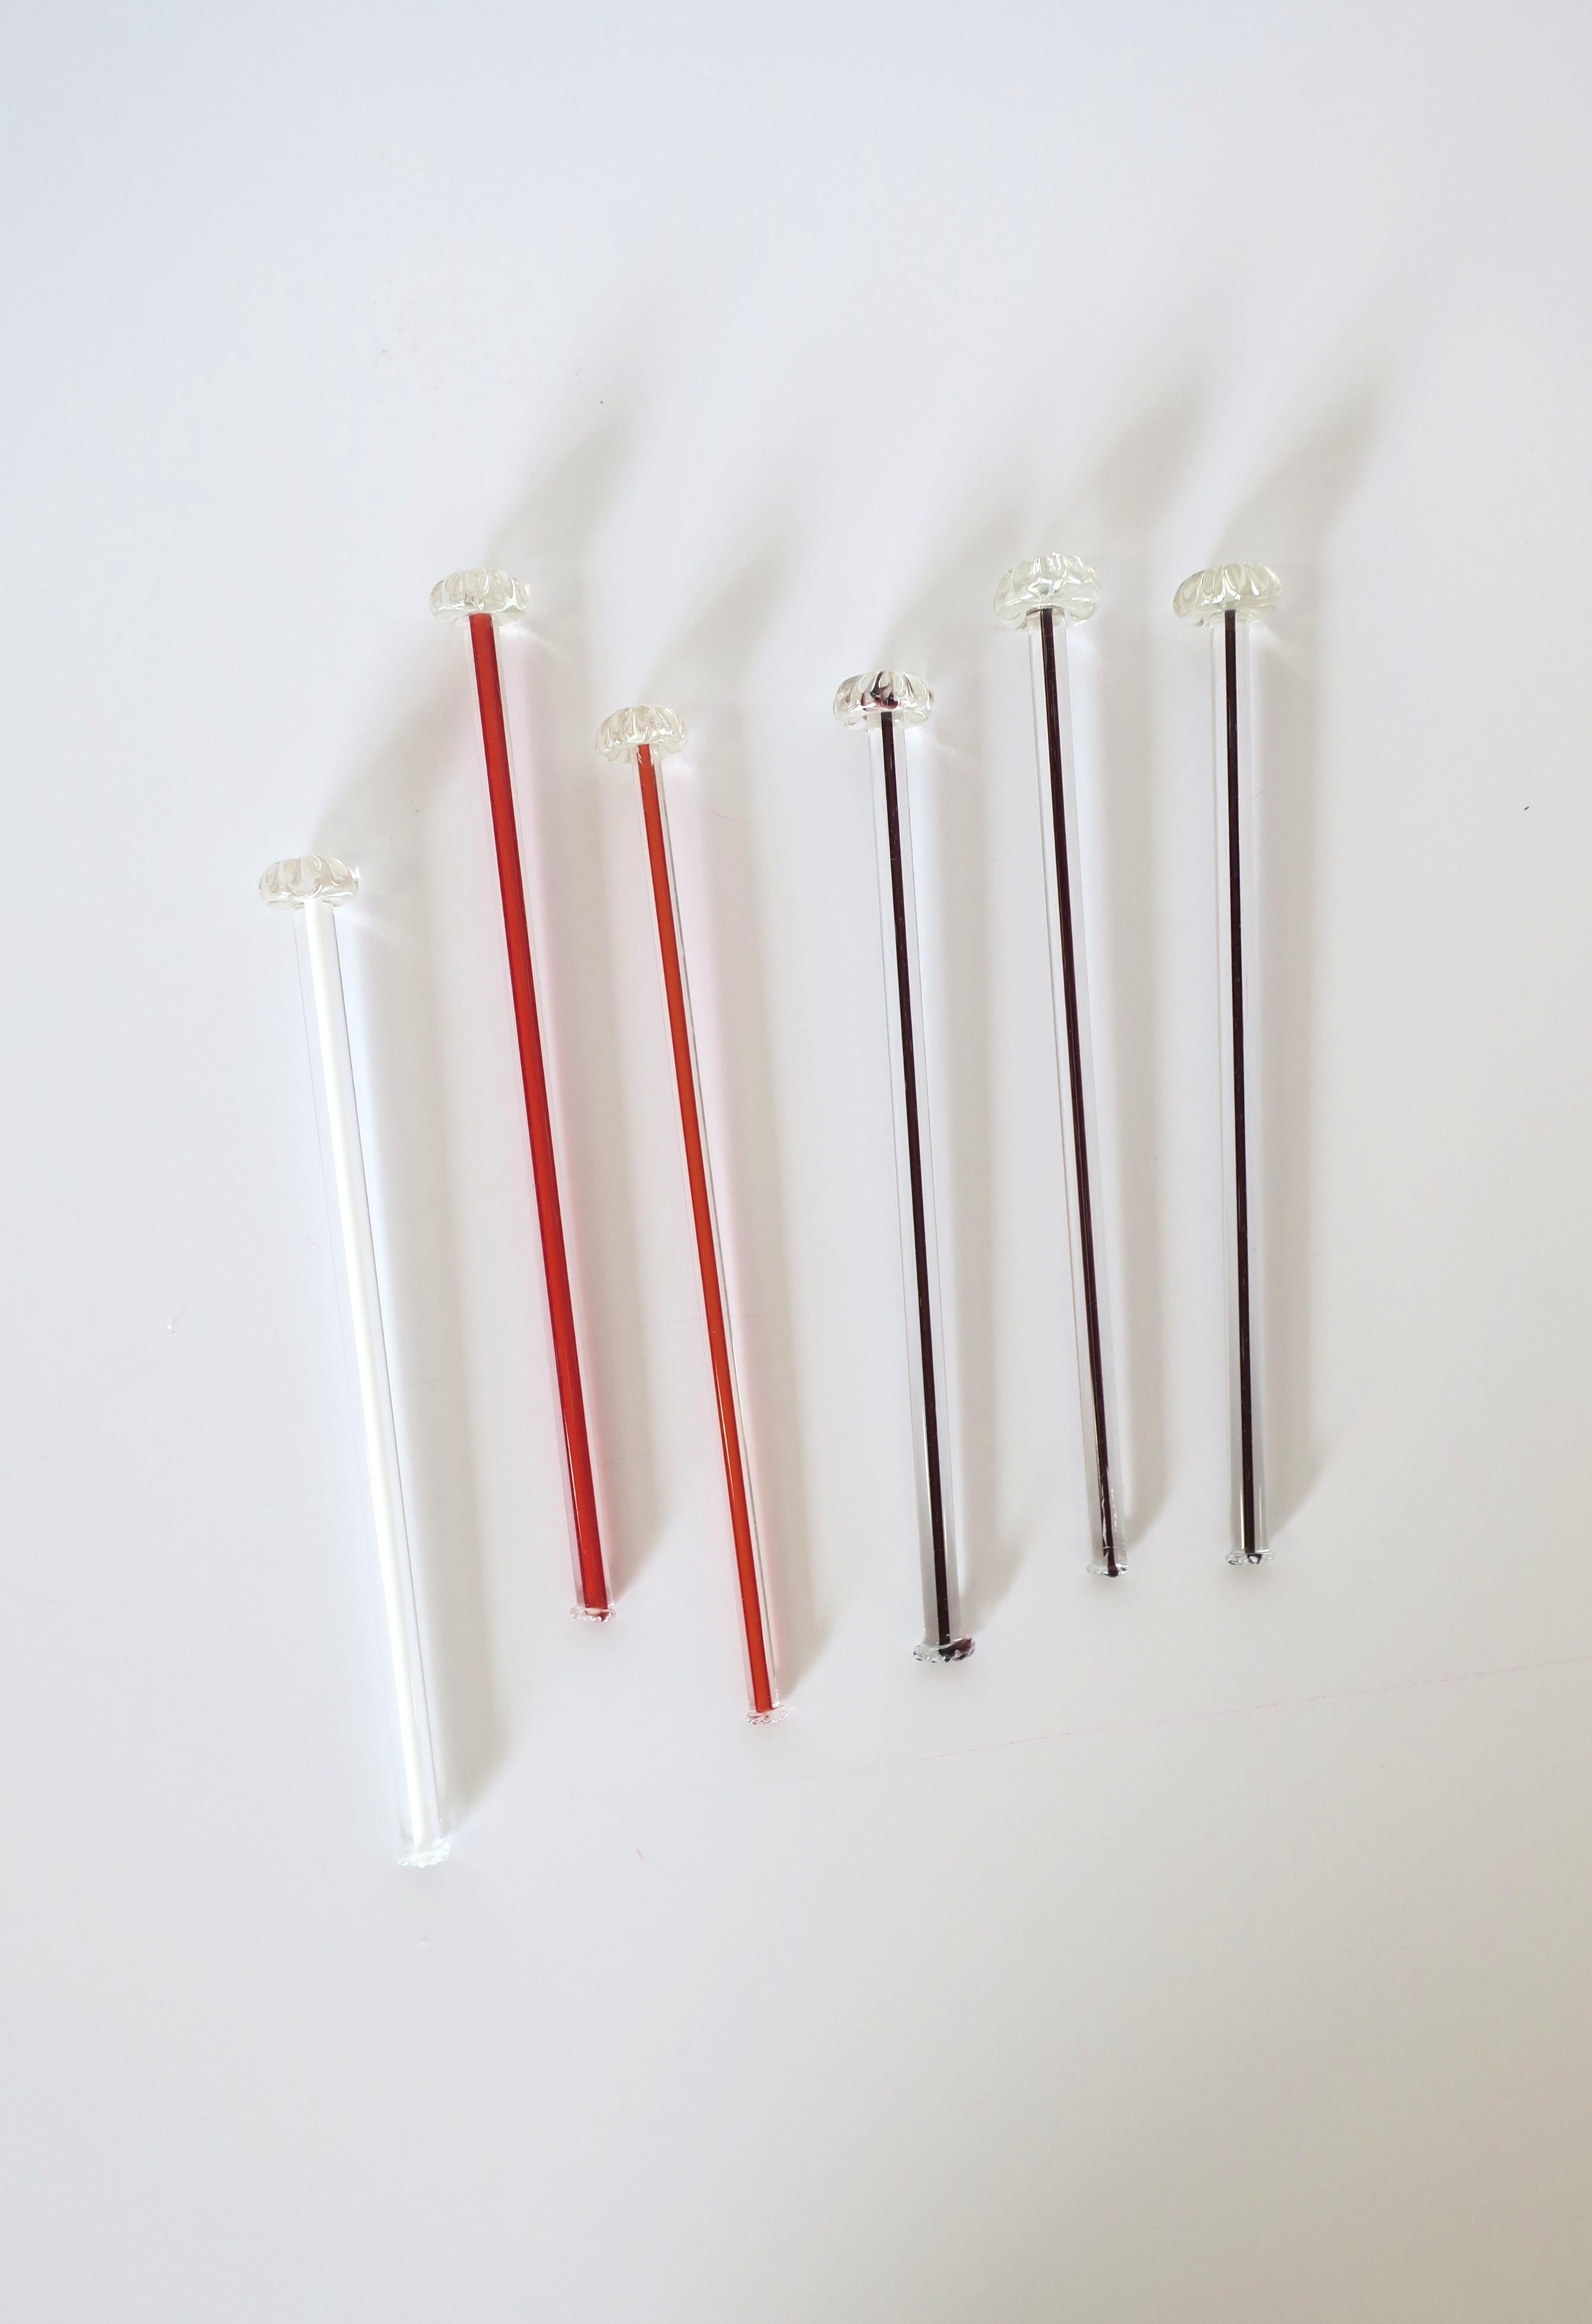 A very beautiful set of six (6) vintage Italian Murano barware art glass cocktail stirrers, Mid-Century Modern period, mid-20th century, Italy. Set is hand-crafted in transparent/clear, red, plum and white art glass hues, finished with floweret top